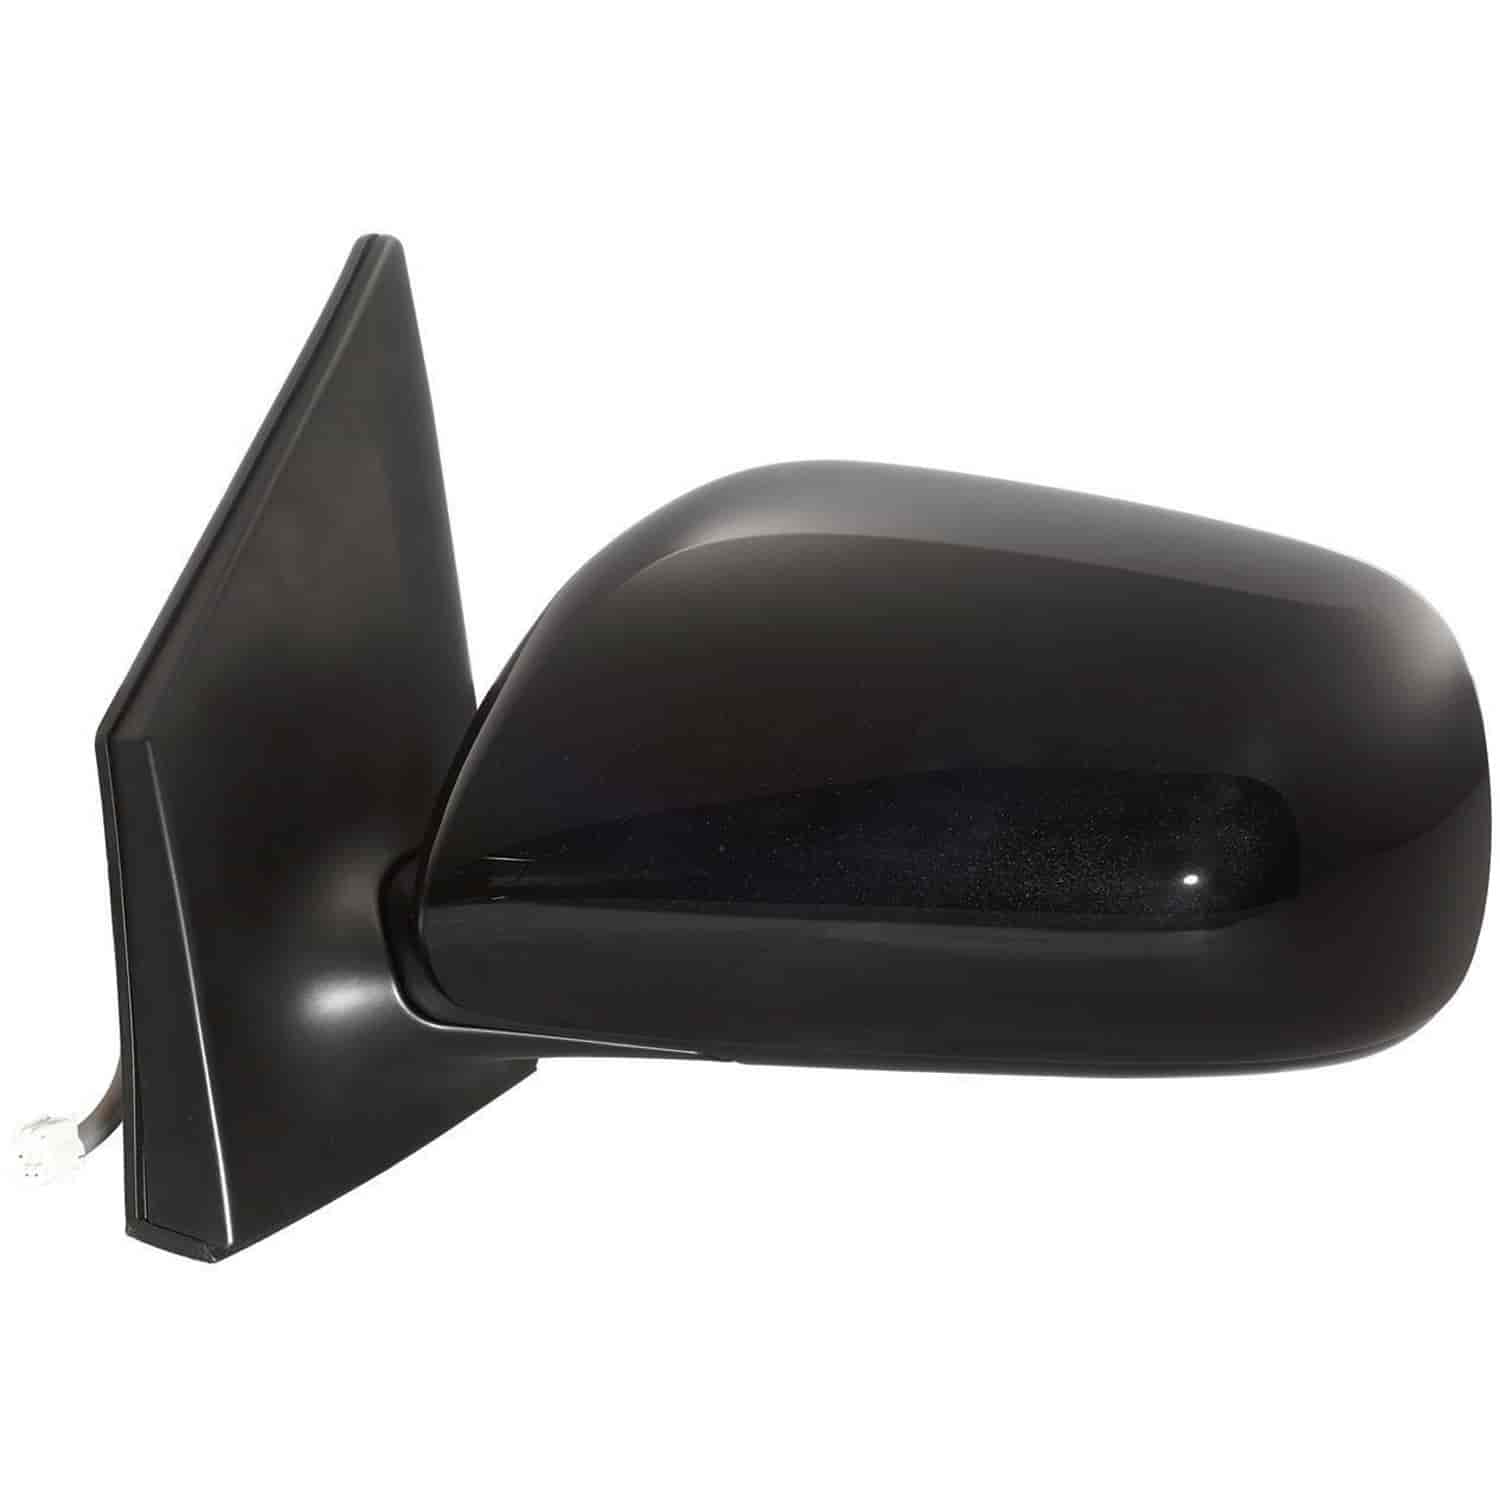 OEM Style Replacement mirror for 09-12 Toyota Corolla US built ; Toyota Corolla Japan built driver s